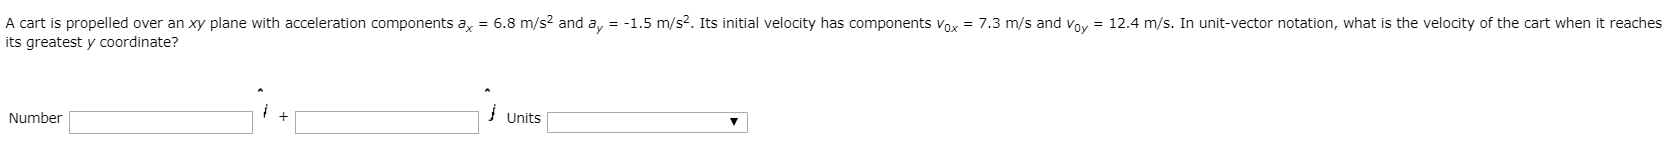 A cart is propelled over an
its greatest y coordinate?
xy plane with acceleration components a, = 6.8
m/s? and a, = -1.5 m/s2. Its initial velocity has components Vox = 7.3
m/s and
voy = 12.4 m/s.
In unit-vector notation, what is the velocity of the cart when it reaches
Number
Units
